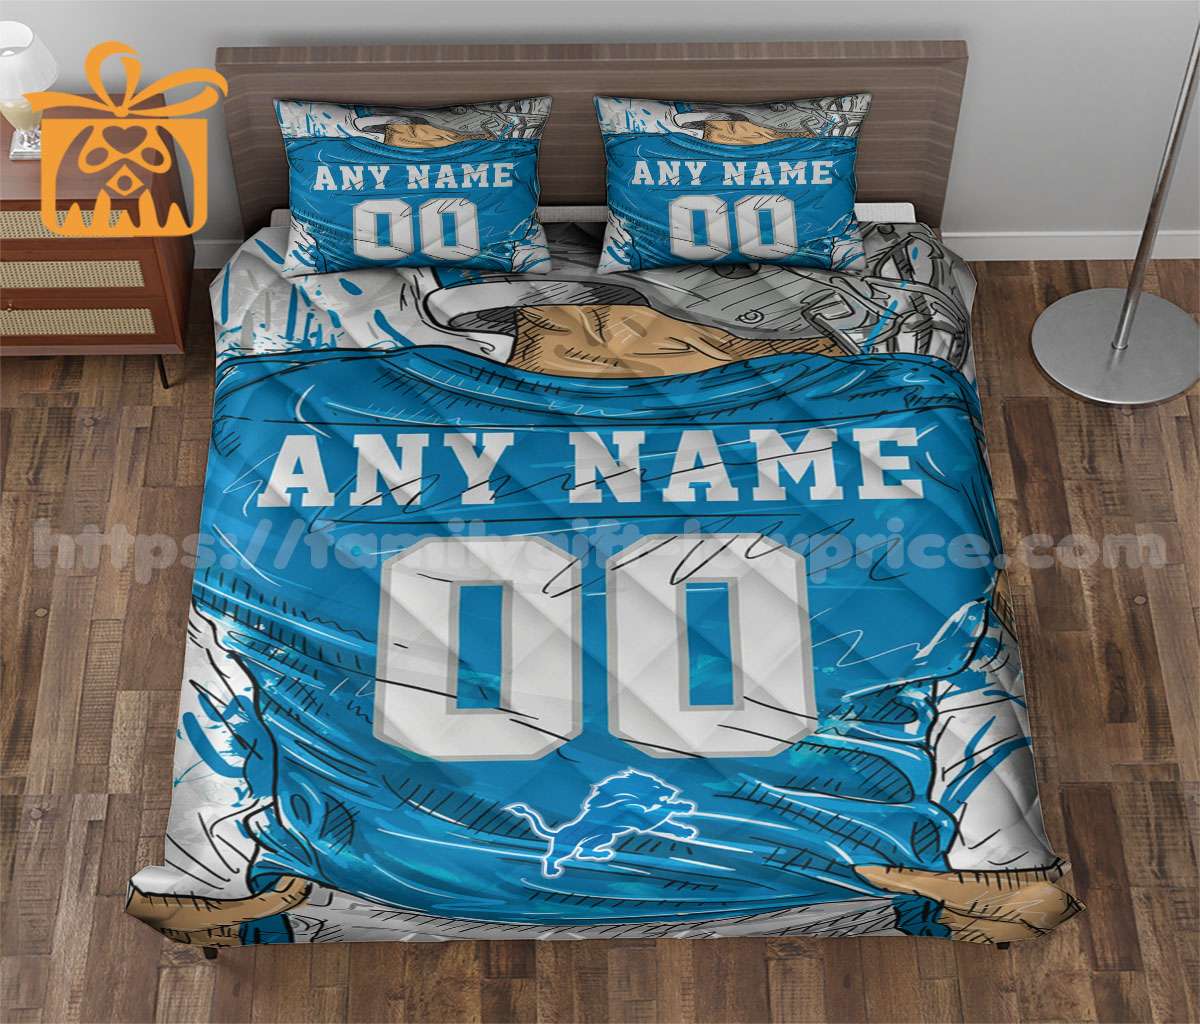 Detroit Lions Custom Jersey Quilt Bedding Sets, Detroit Lions Gifts, Personalized NFL Jerseys with Your Name & Number